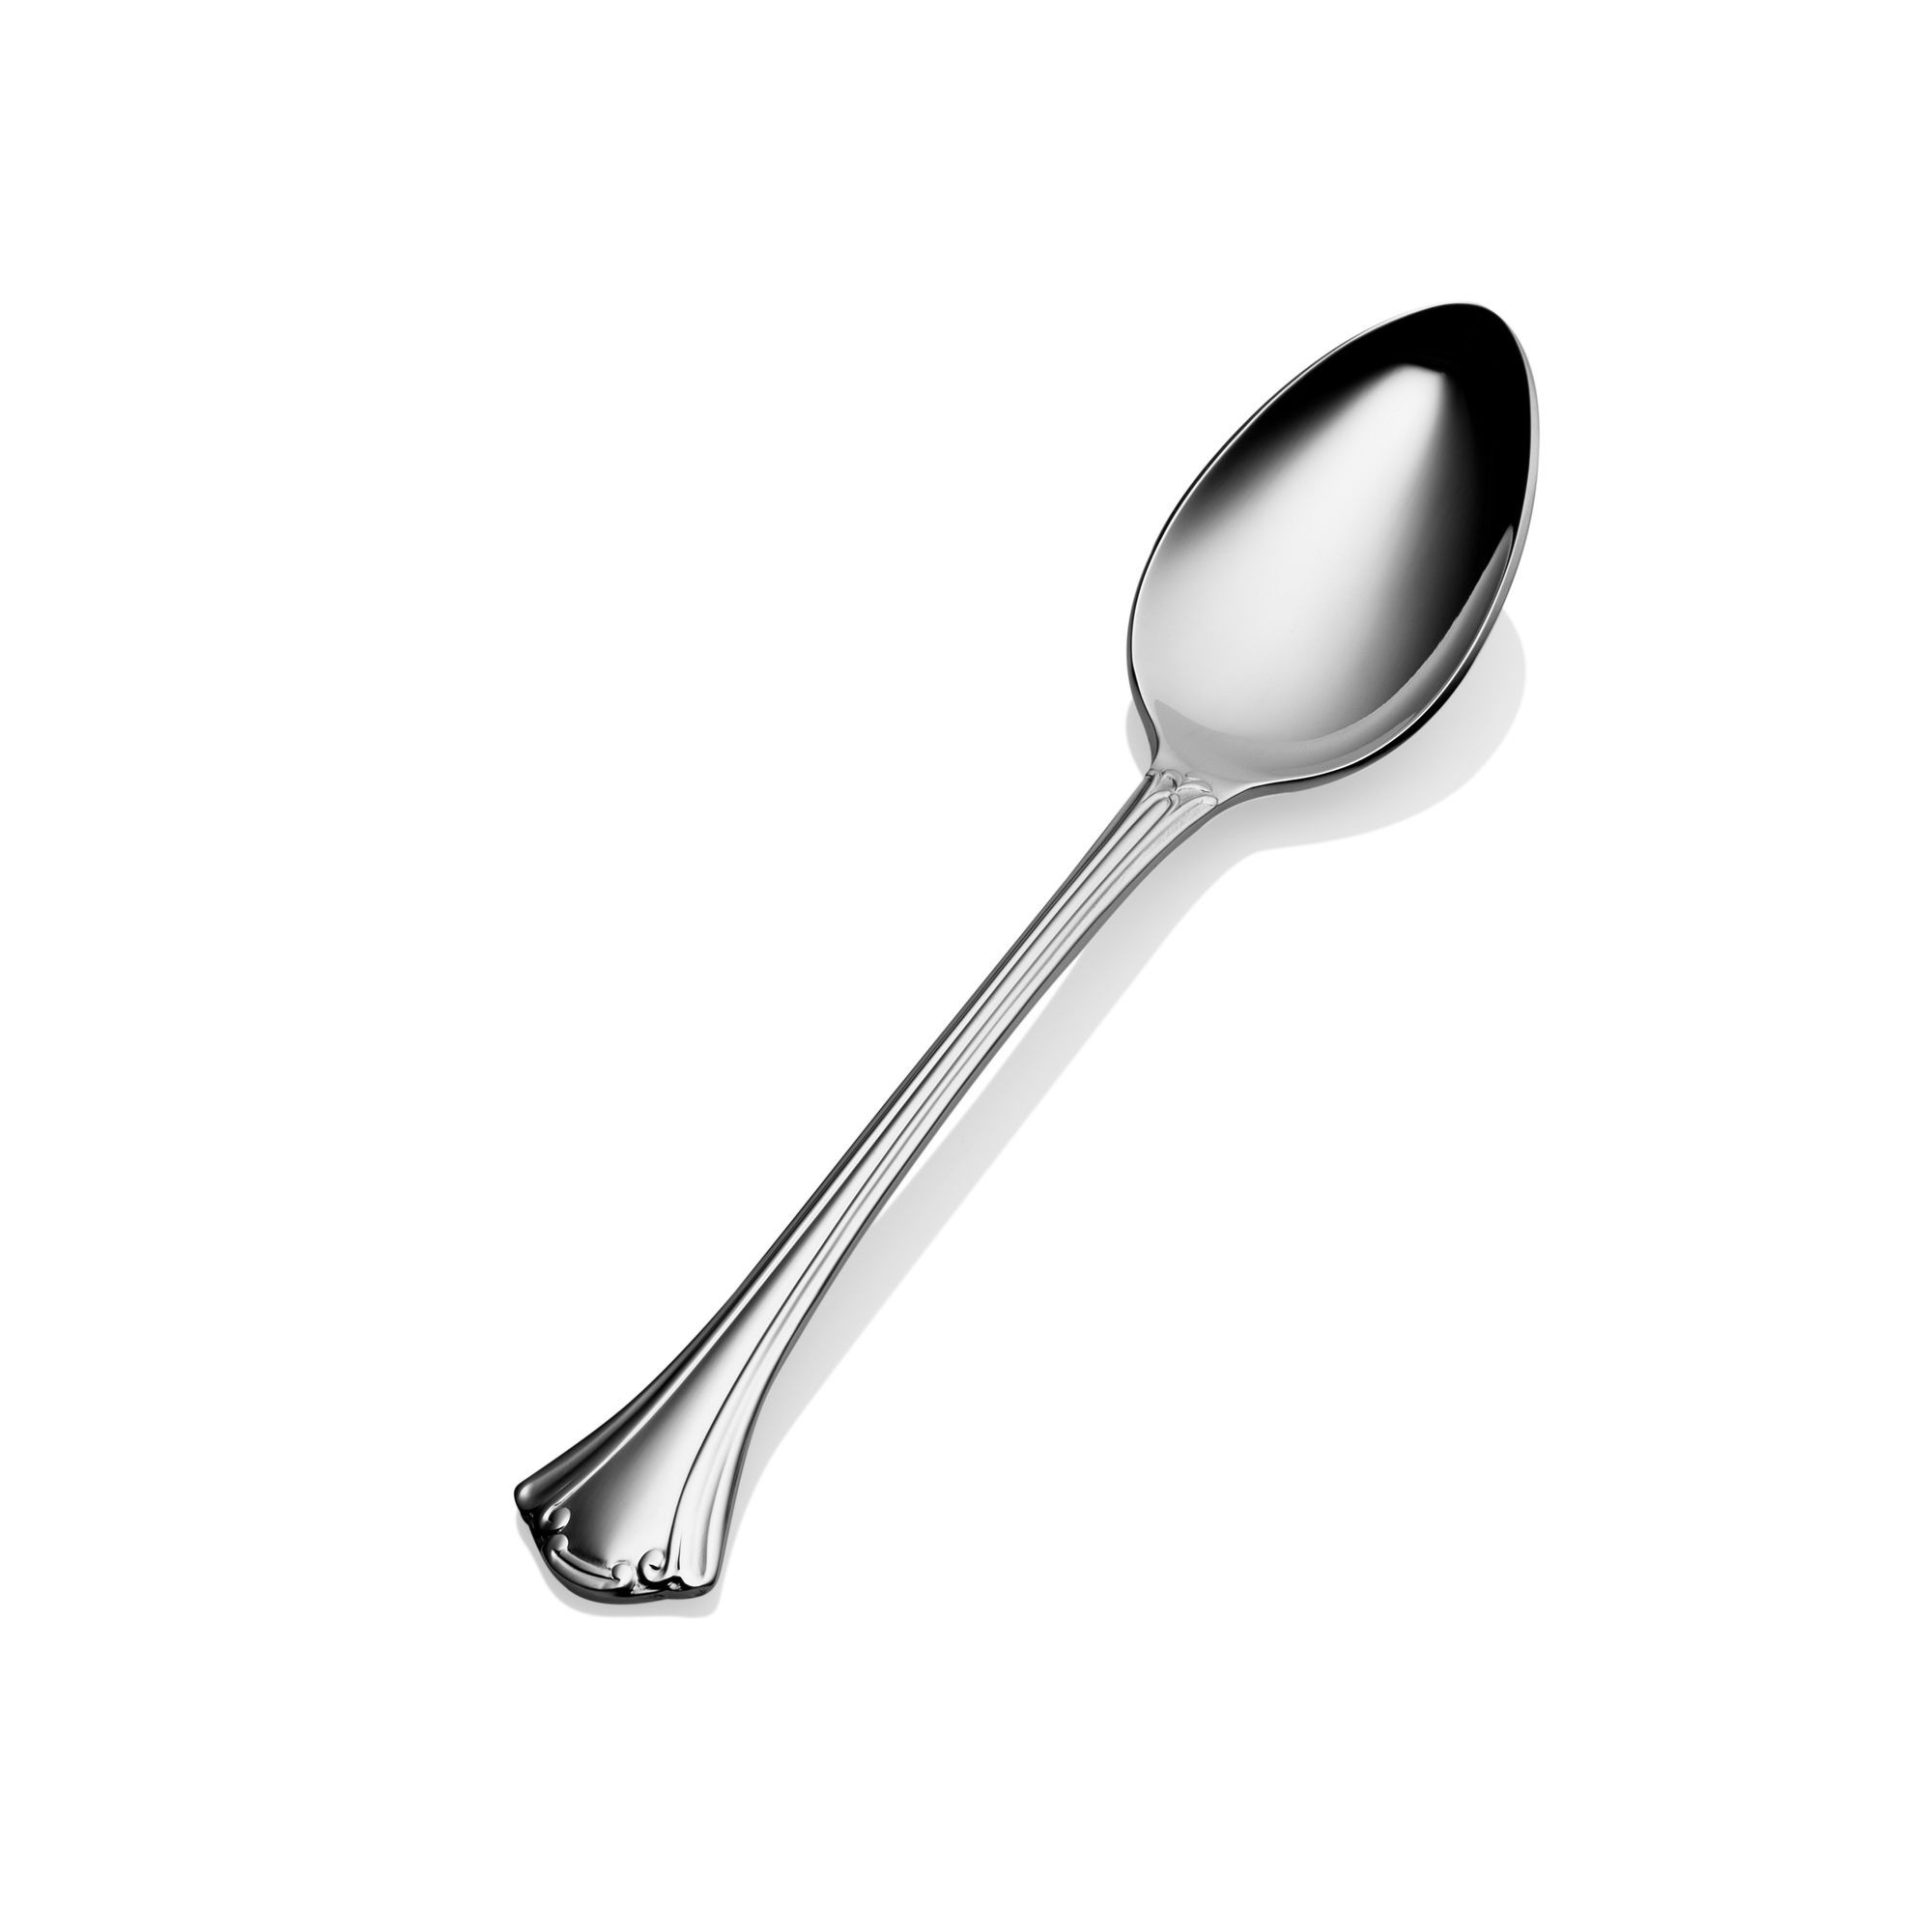 Bon Chef S2103 Breeze 18/8 Stainless Steel Soup and Dessert Spoon